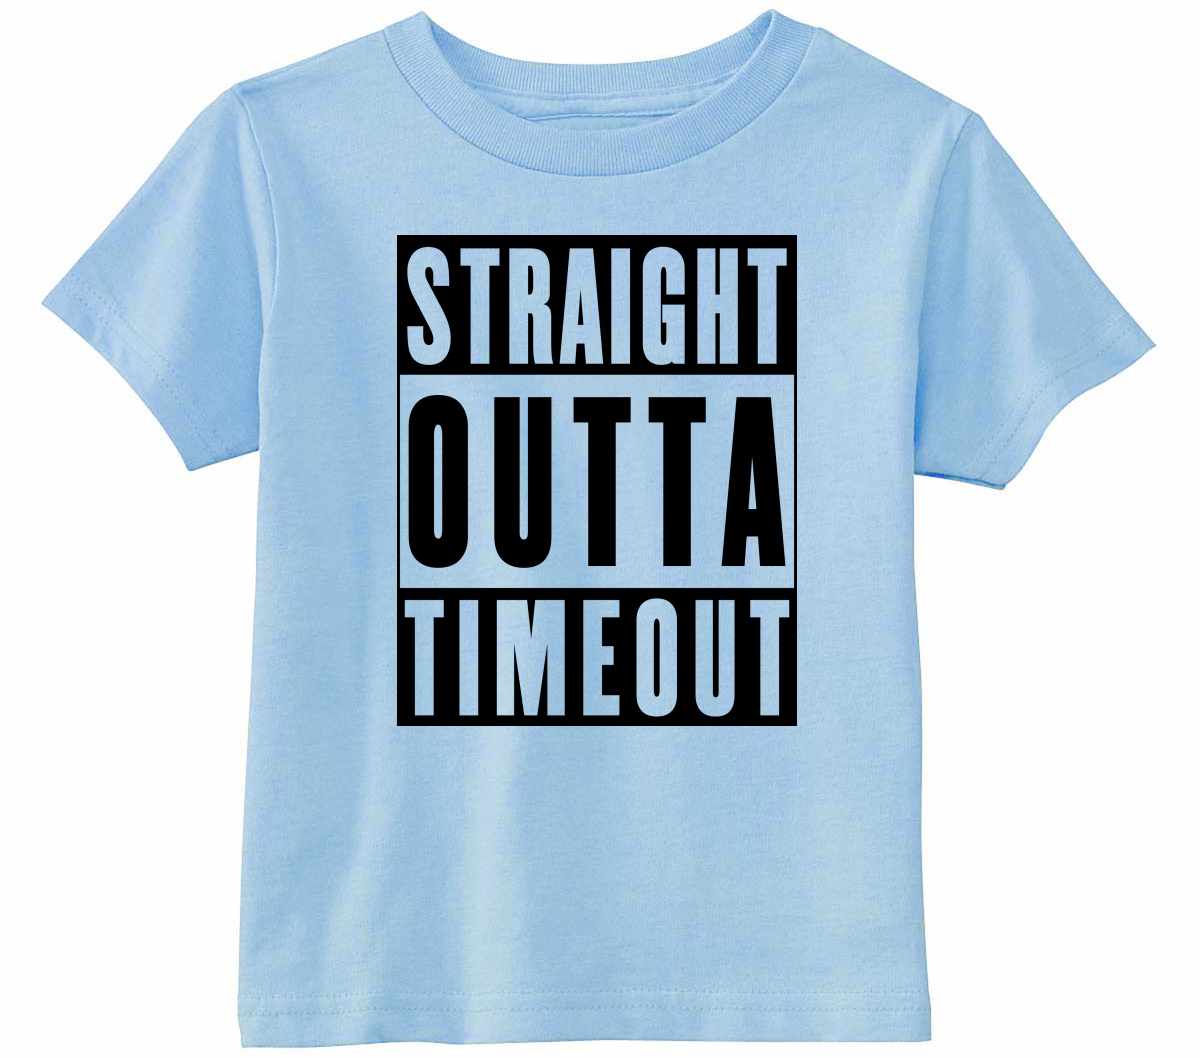 Straight Outta TimeOut Infant/Toddler  (#1096-7)